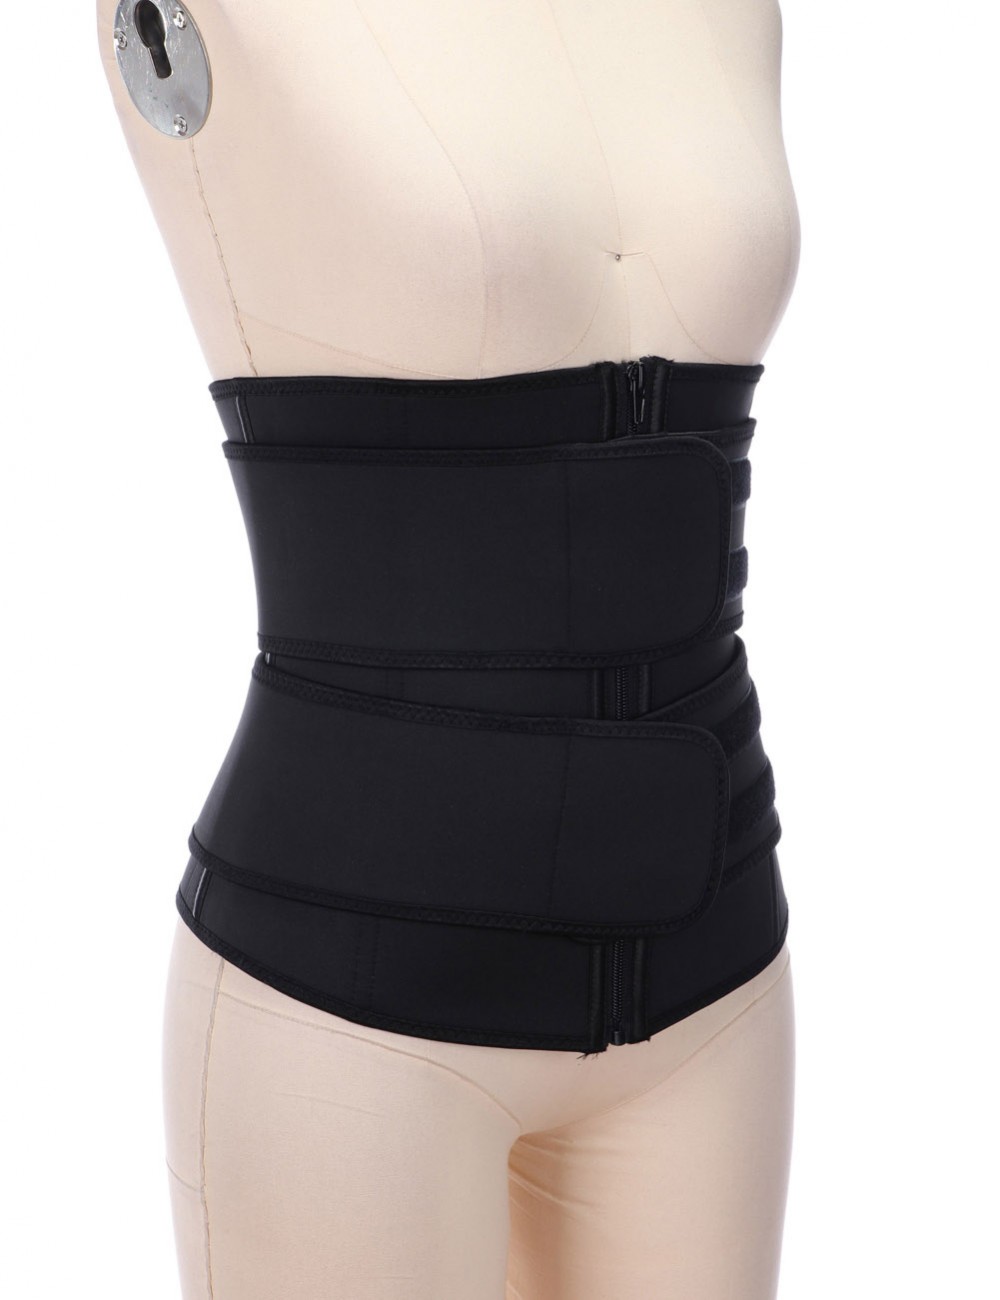 Double Belt Black Big Size Latex Waist Trainer For Loss Weight